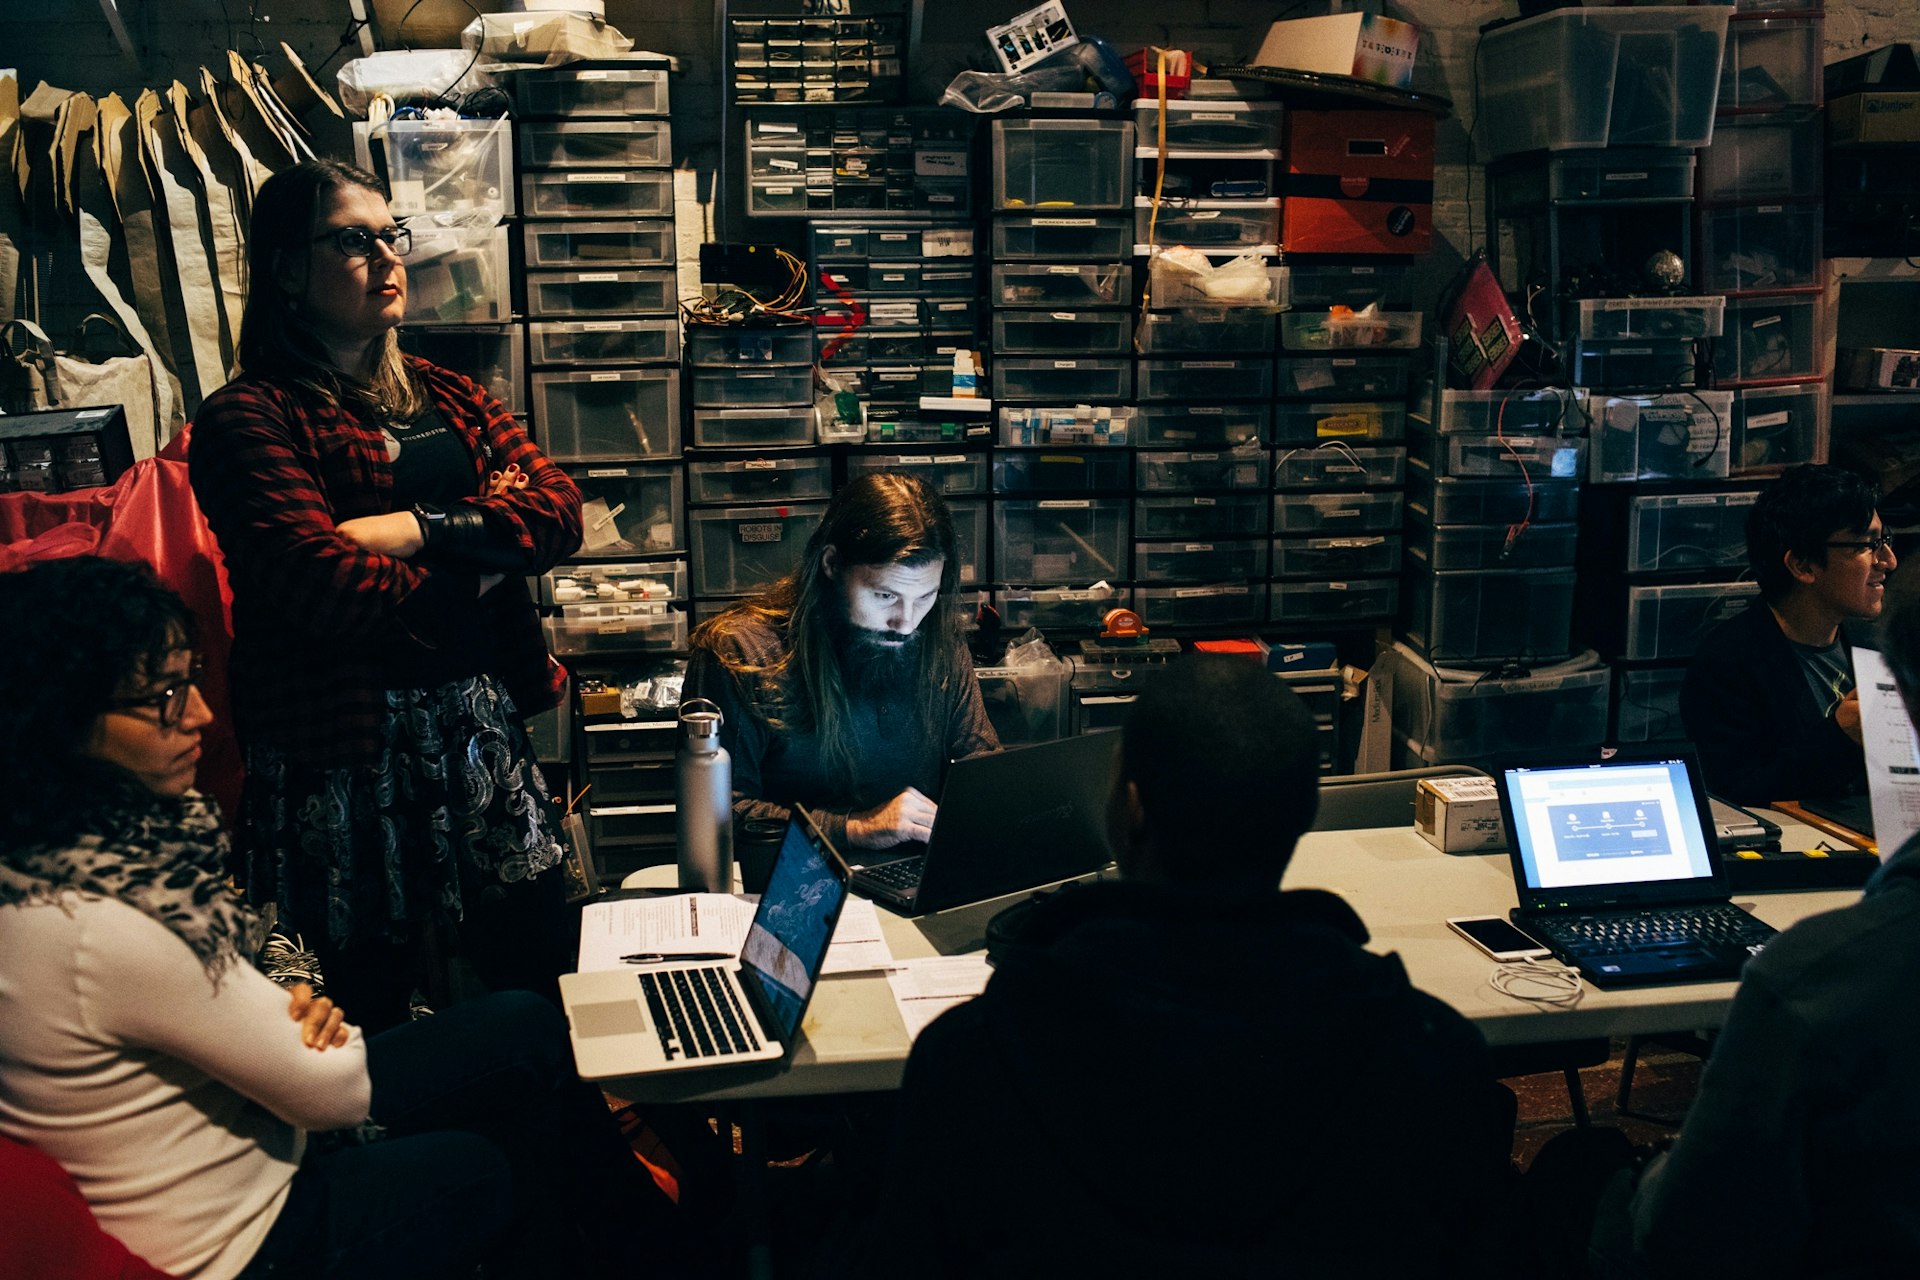 Hacker enthusiasts from all walks of life - researchers, journalists, everyday citizens gather at NYC Resistor, the home of New York's main CryptoParty chapter, to learn basic encryption skills that can be easily passed on and picked up by anyone.